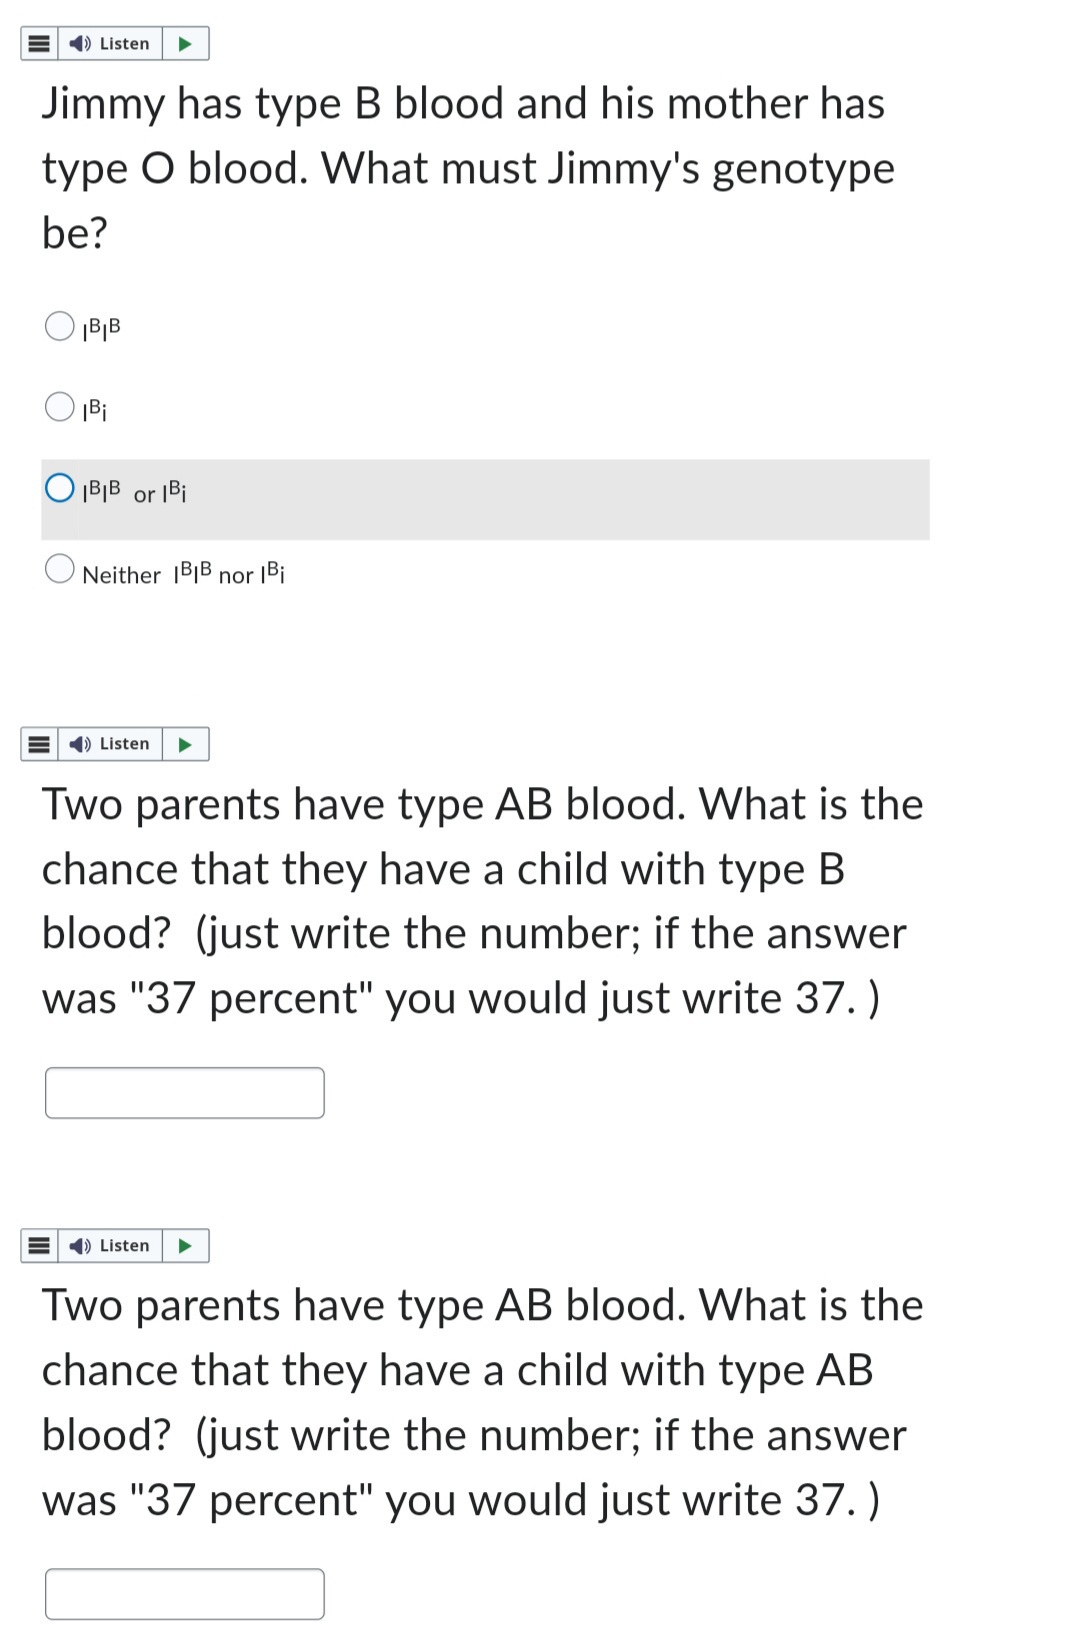 ➡ Listen
Jimmy has type B blood and his mother has
type O blood. What must Jimmy's genotype
be?
B|B
|Bi
OBIB or Bi
Neither IBIB nor |Bi
➡) Listen
Two parents have type AB blood. What is the
chance that they have a child with type B
blood? (just write the number; if the answer
was "37 percent" you would just write 37.)
➡ Listen
Two parents have type AB blood. What is the
chance that they have a child with type AB
blood? (just write the number; if the answer
was "37 percent" you would just write 37.)